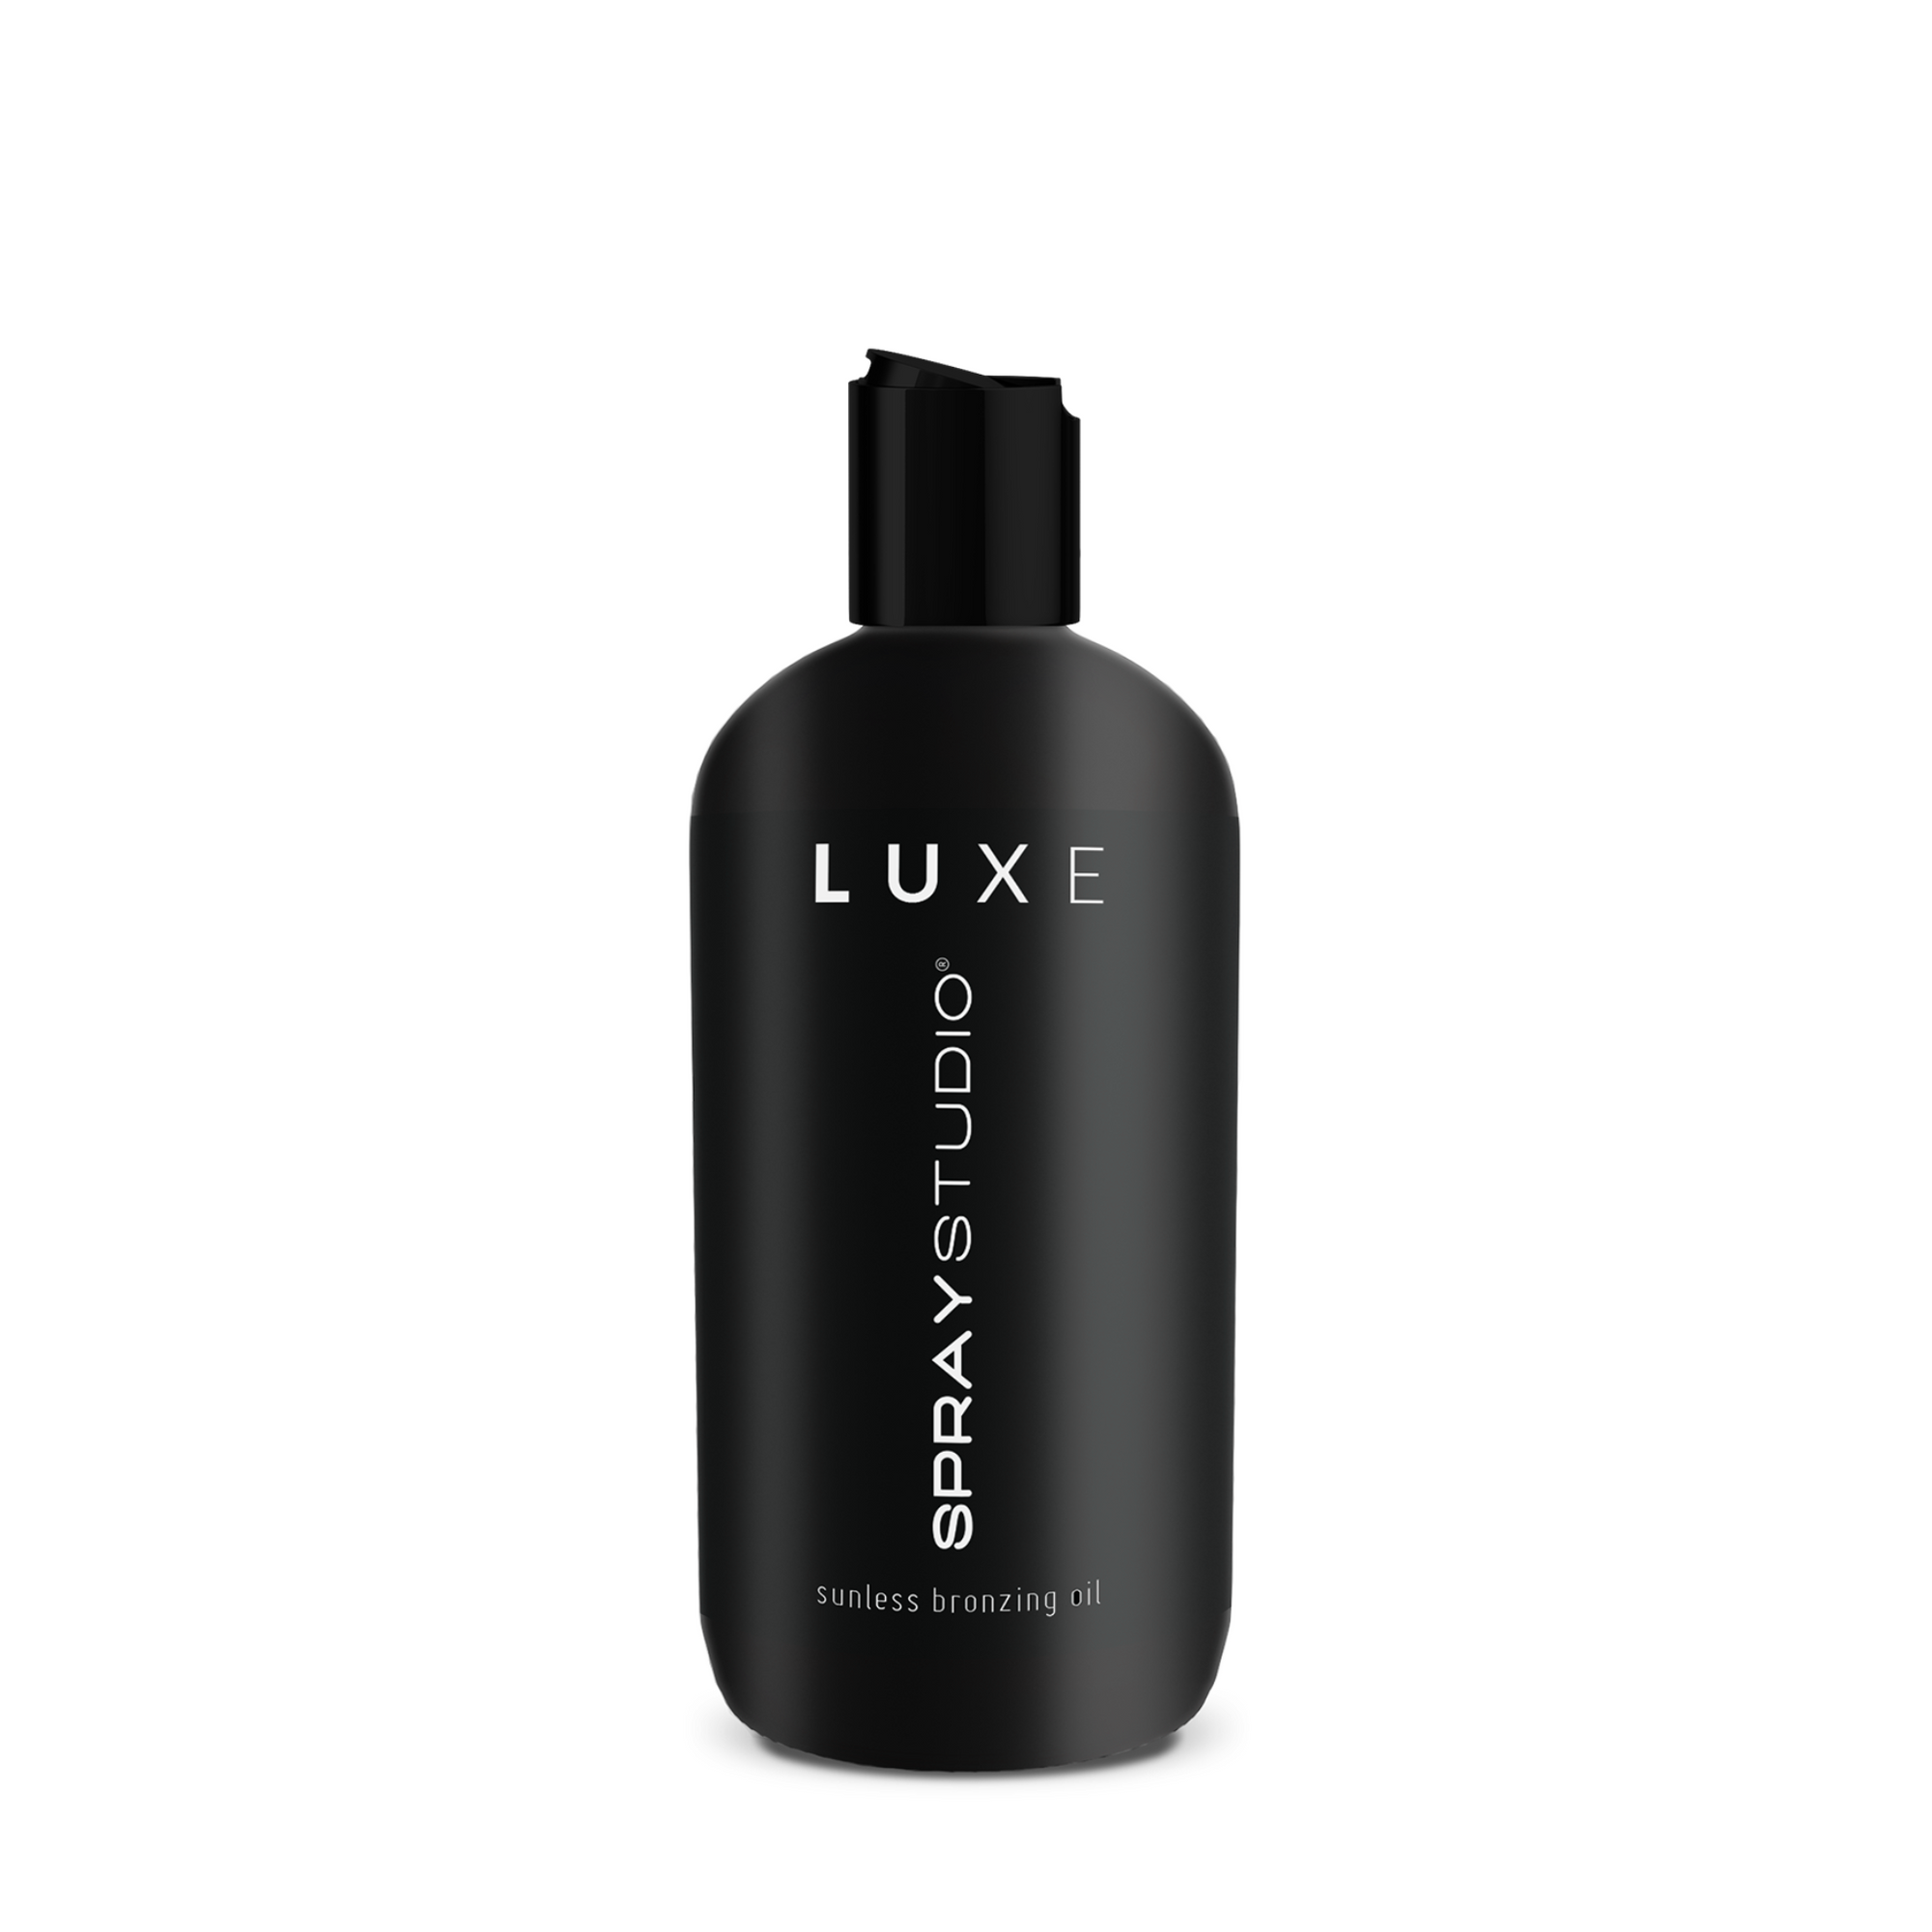 LUXE Sunless Bronzing Oil - SPRAY STUDIO® | sunless tanning and body care